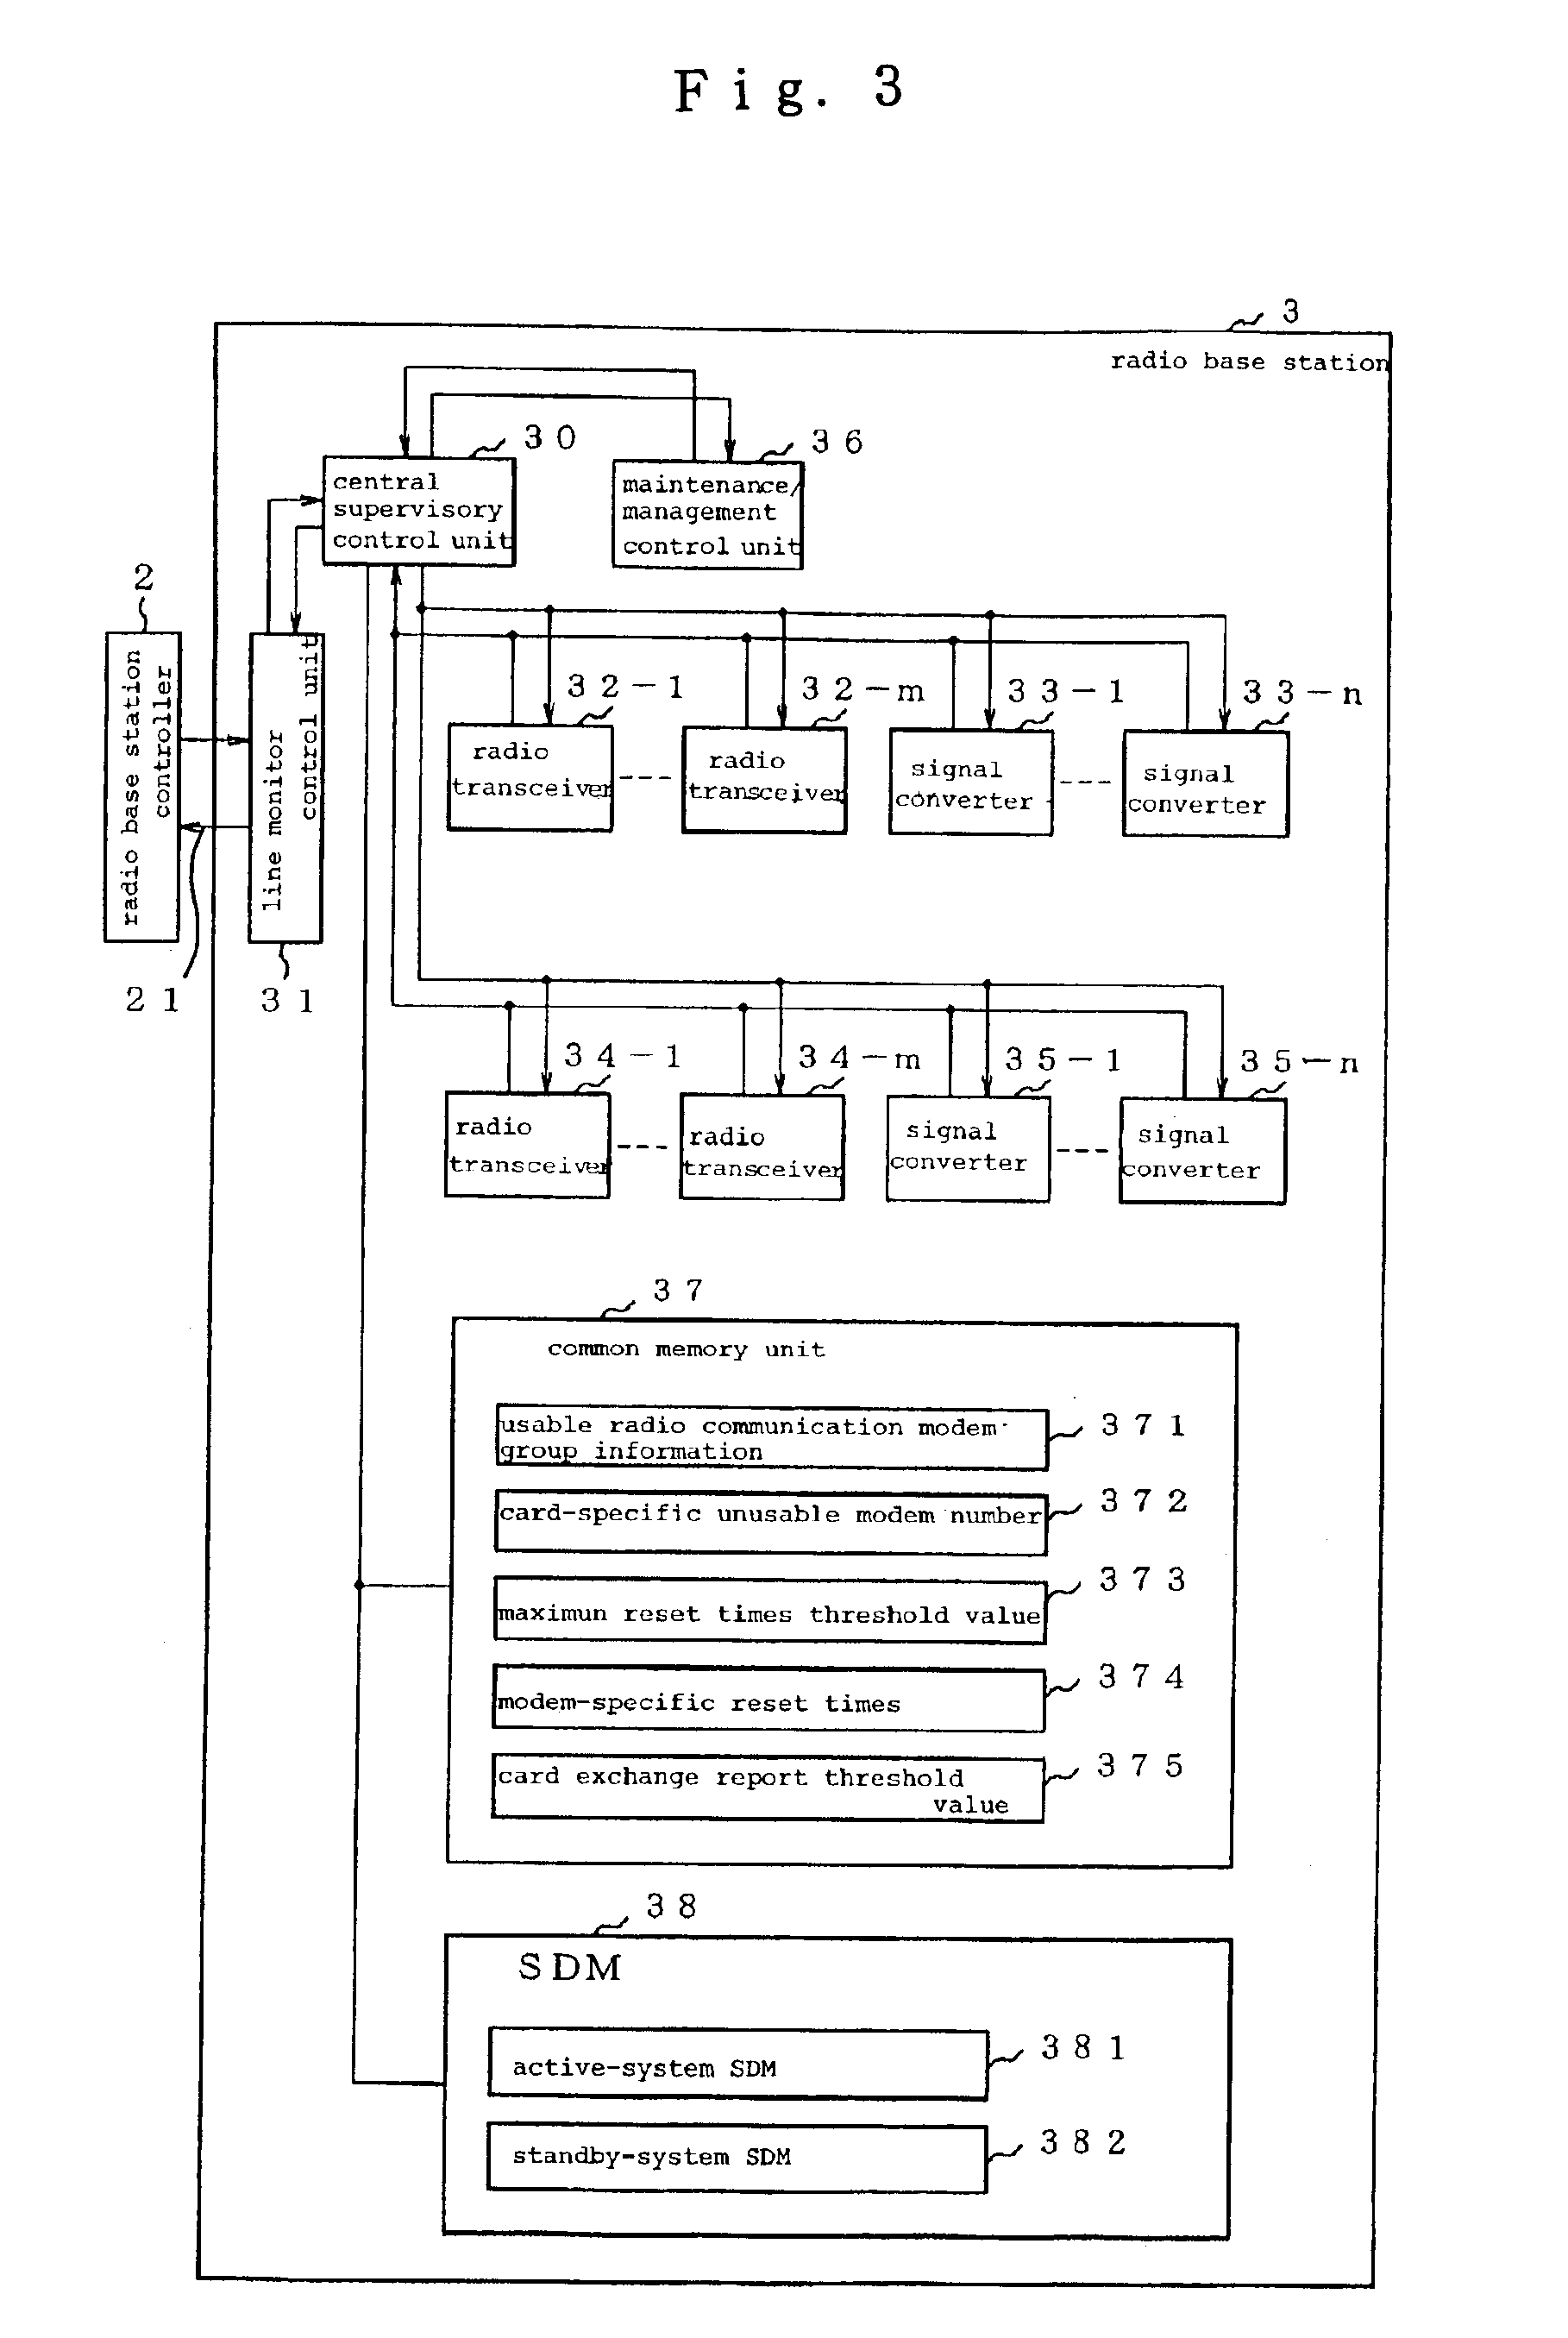 Radio base station for monitoring faults of radio communication modems based on content of received frames that are received during call connections